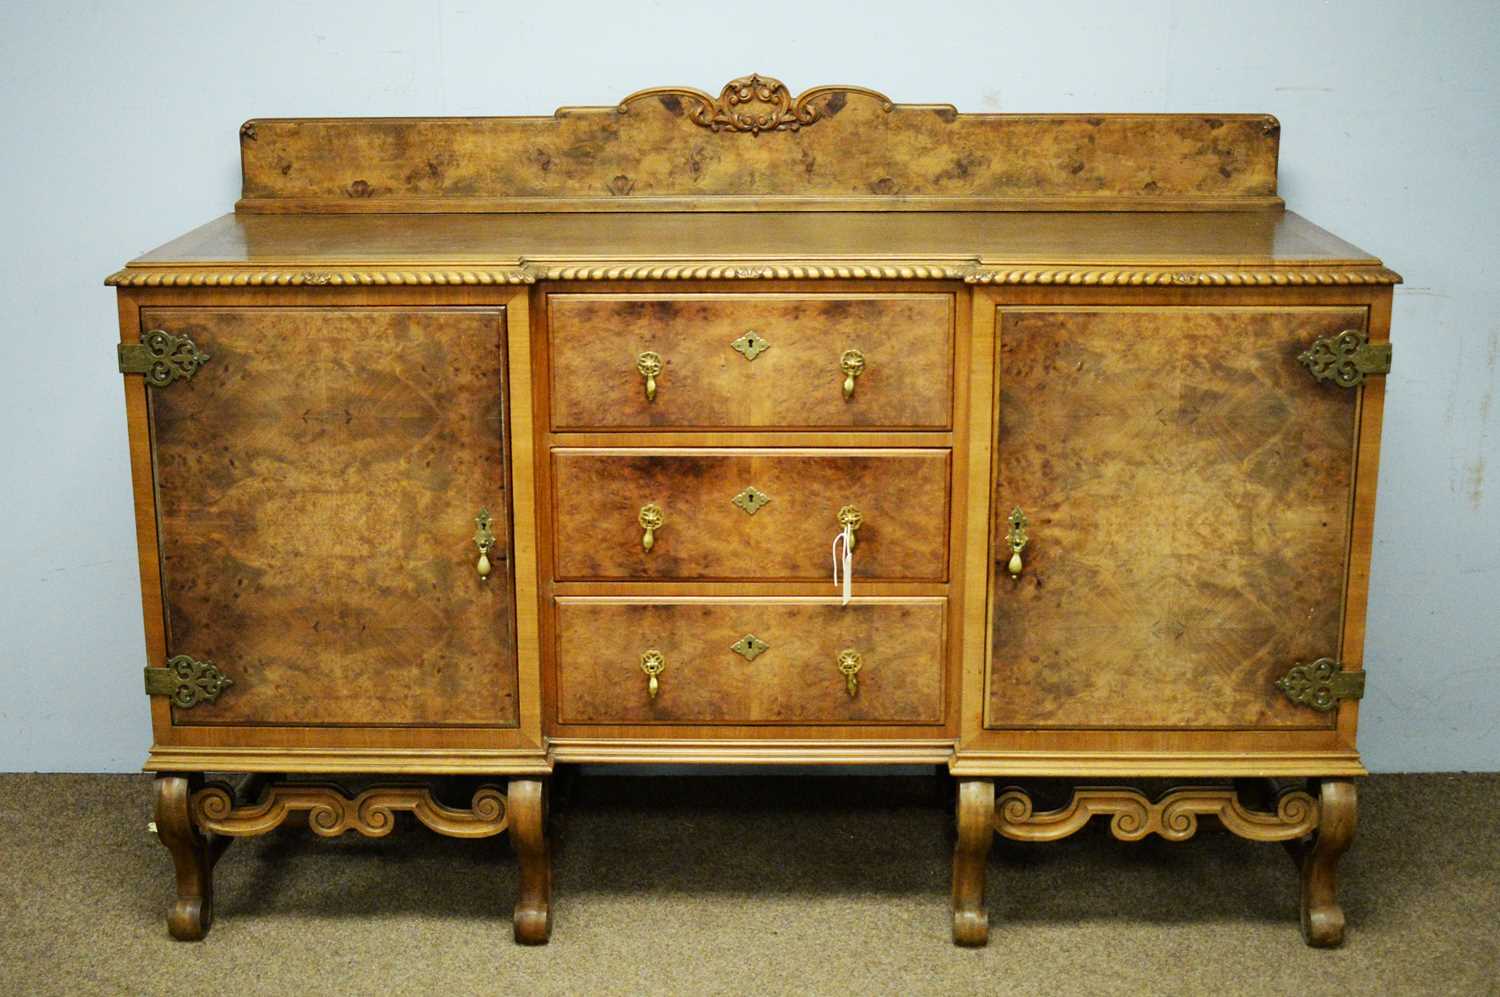 20th Century sideboard.